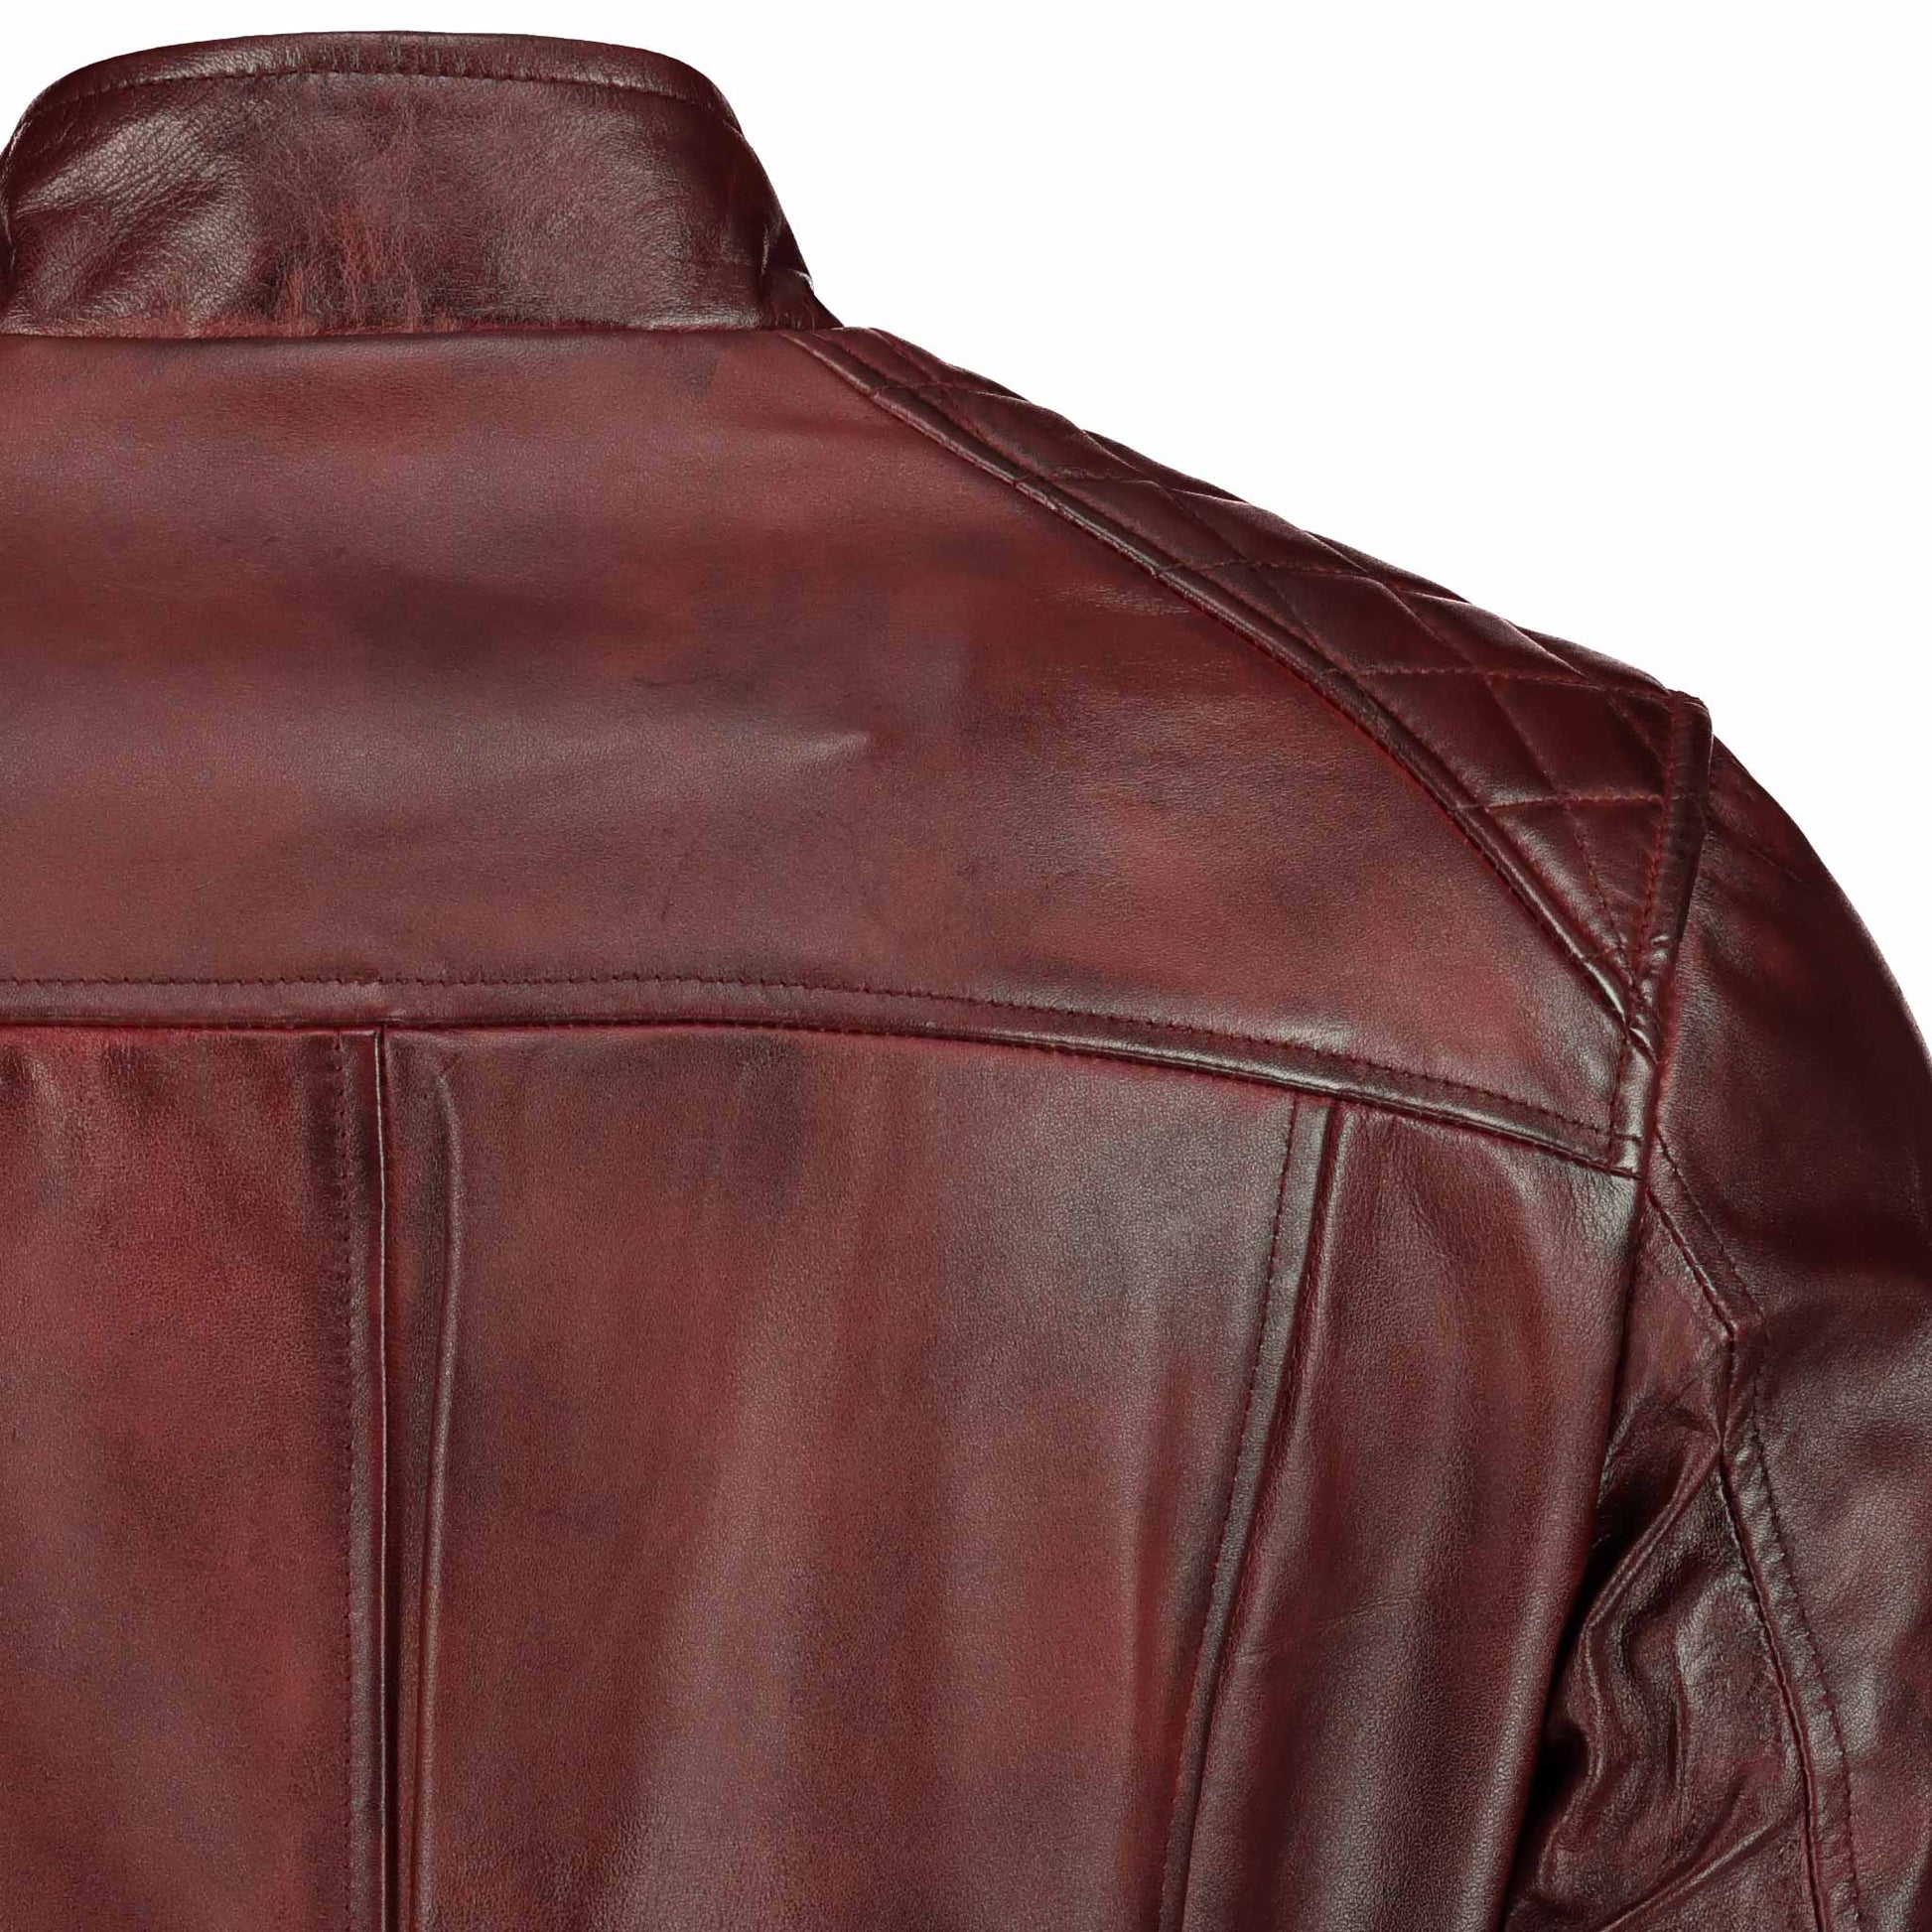 Elite Slim Fit Leather Jacket (Ox Red)- Supreme Leather Supreme Leather